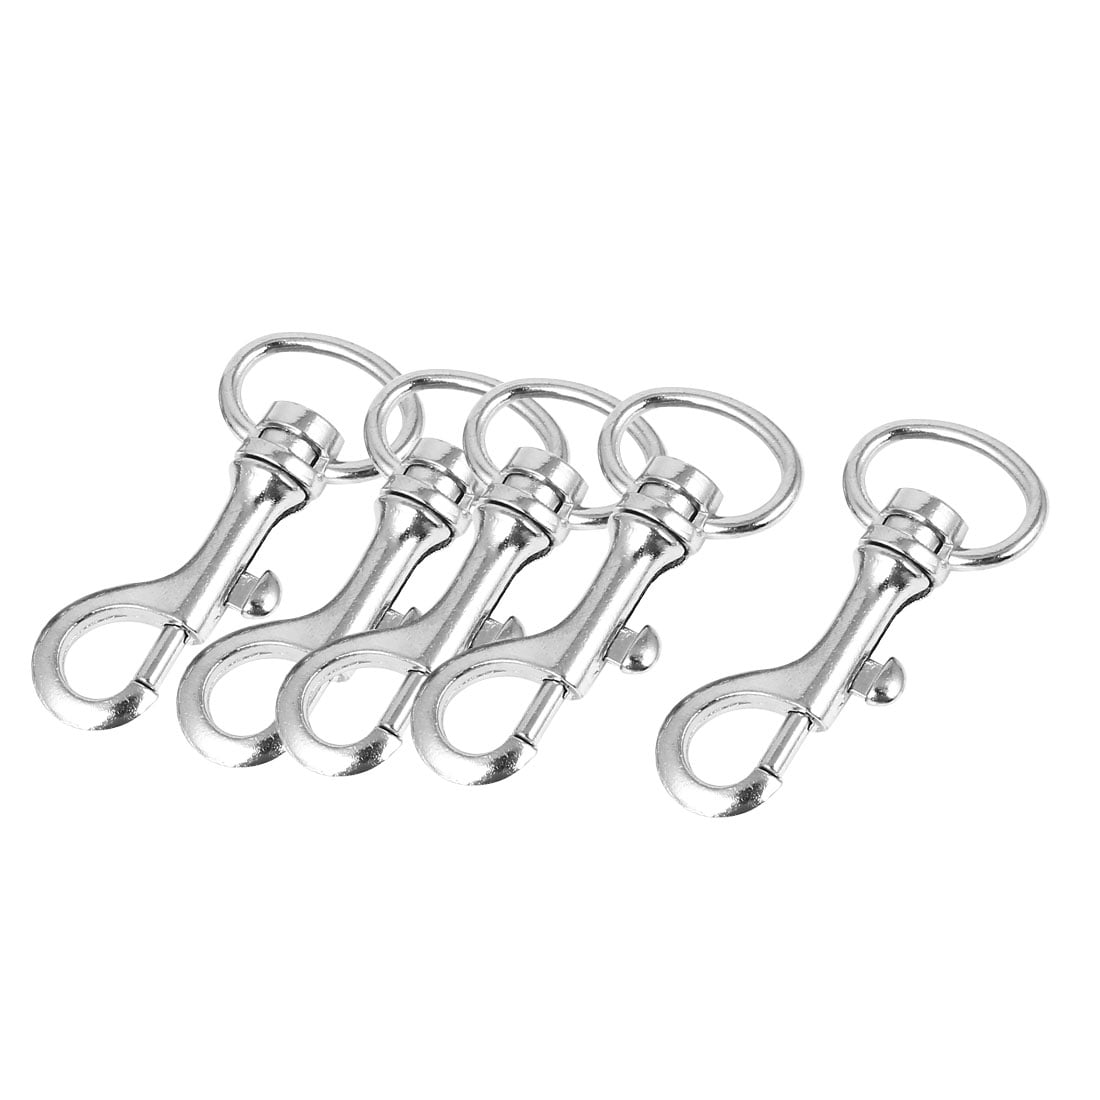 Ranbo 304 Stainless Steel Swivel Eye Snap Lobster Lifting Clasp snap Hook with Latch 330 LB Working Load Limit 3/16 inch 